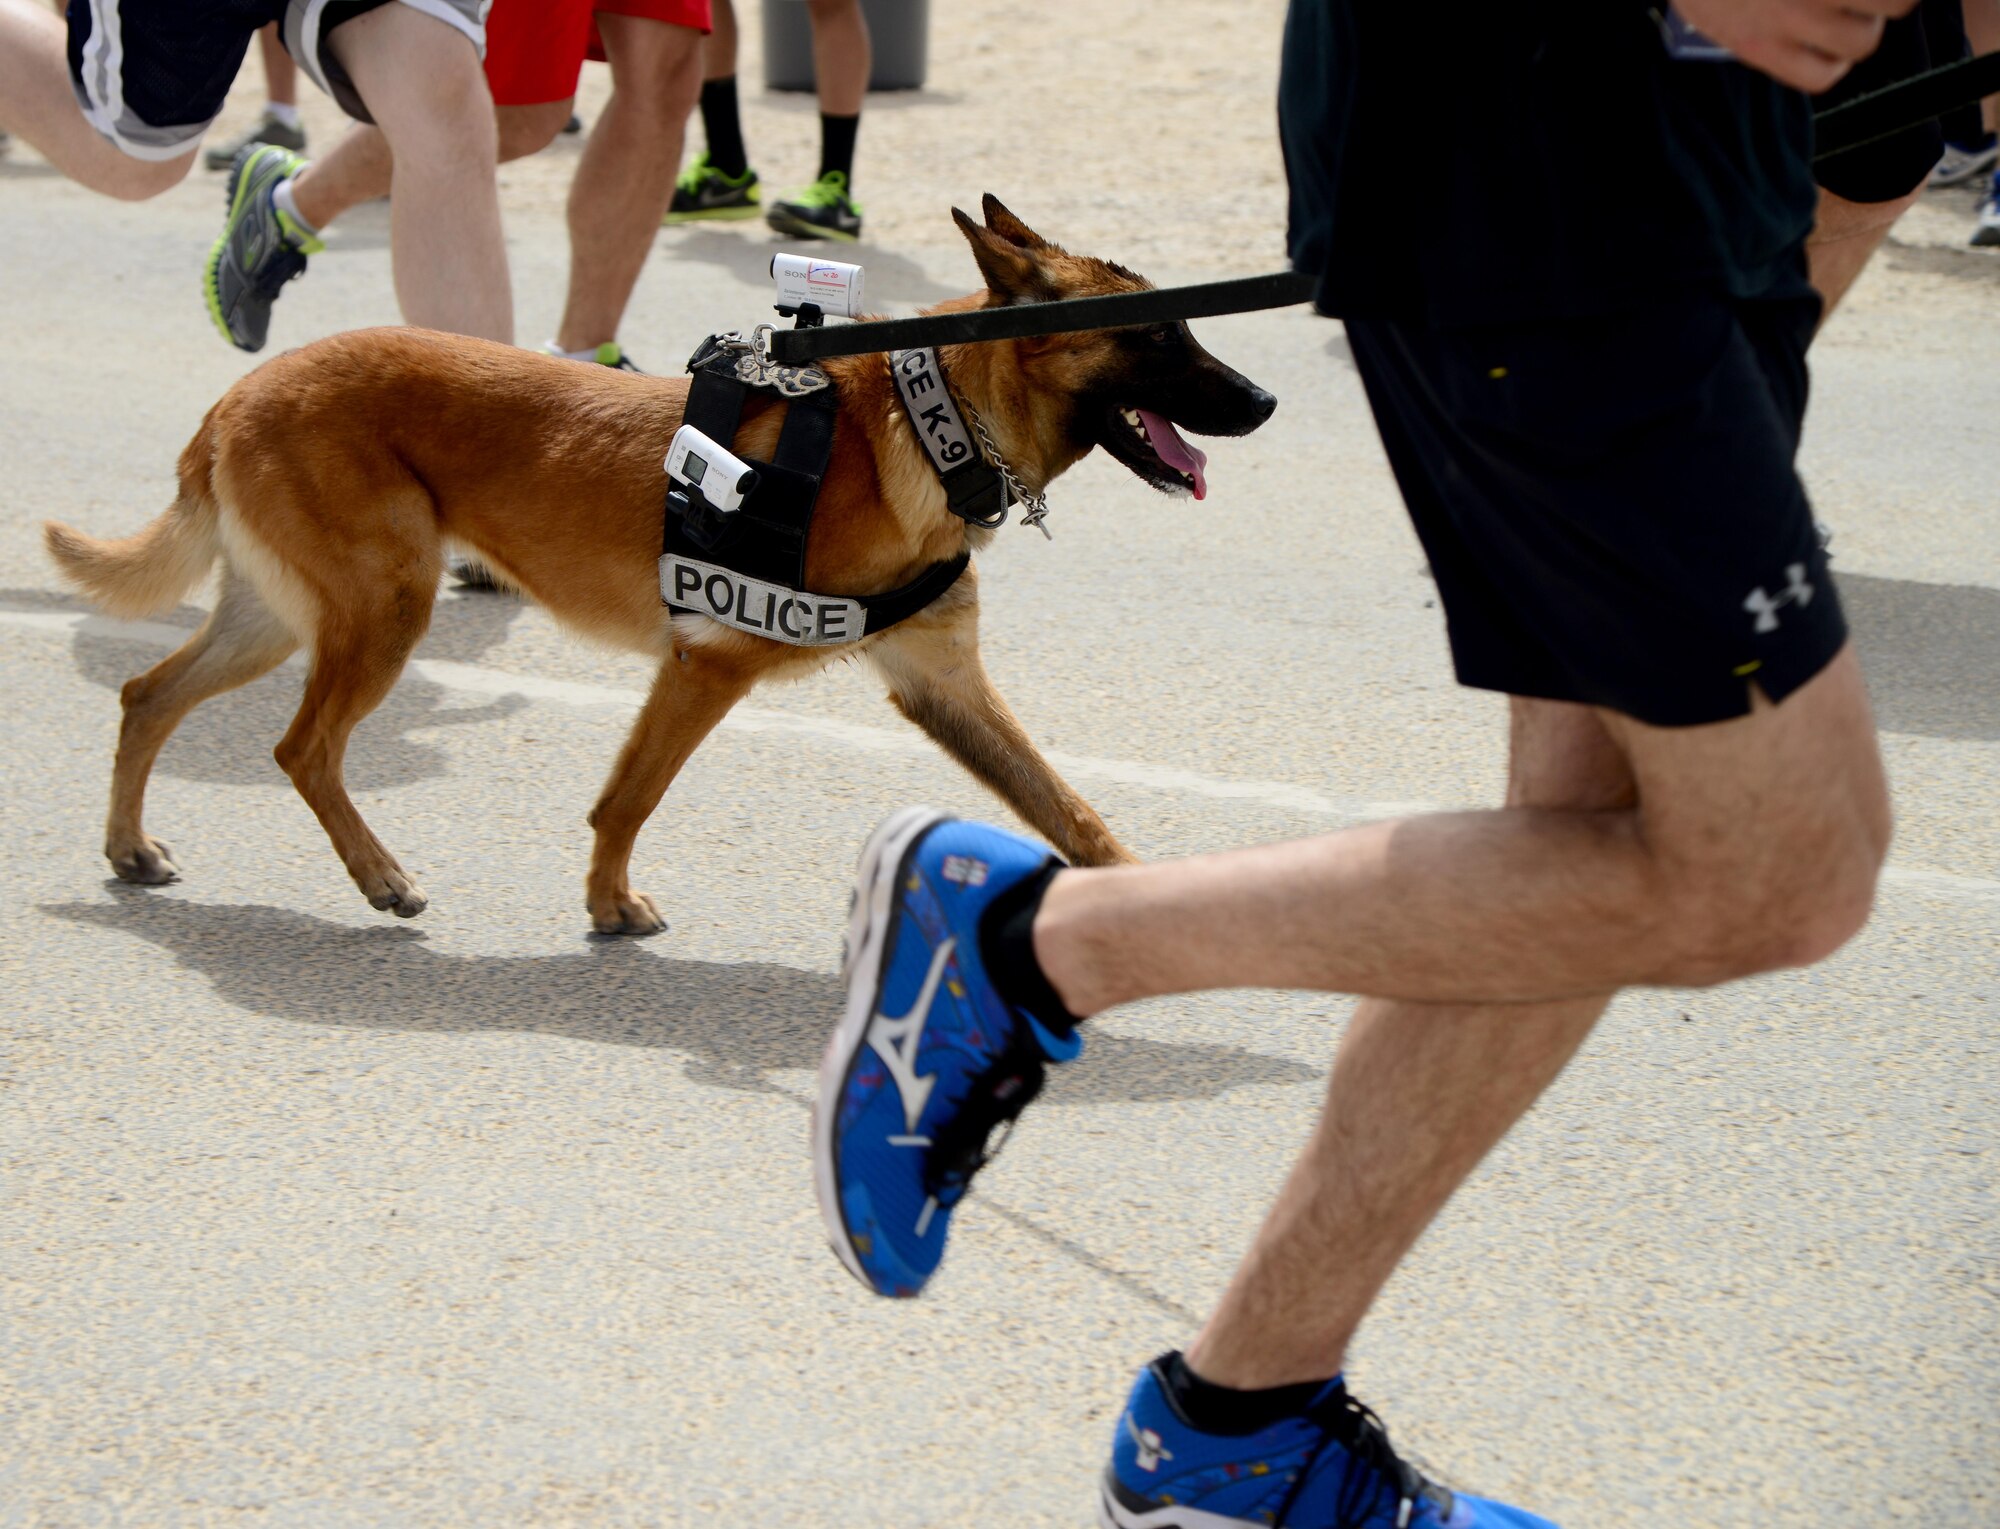 A K-9 from the 379th Expeditionary Security Forces runs alongside his handler during the 379th Air Expeditionary Wing’s Never Quit event 5k run, April 4, 2015, at Al Udeid Air Base, Qatar. The event was coordinated by the 379th Expeditionary Force Support Squadron with informational booths provided by the 379th Expeditionary Medical Group, 379th Expeditionary Civil Engineer Squadron, and 379th AEW chapel services team. The purpose of the event was to encourage healthy and positive life choices. (U.S. Air Force photo by Senior Airman Kia Atkins)